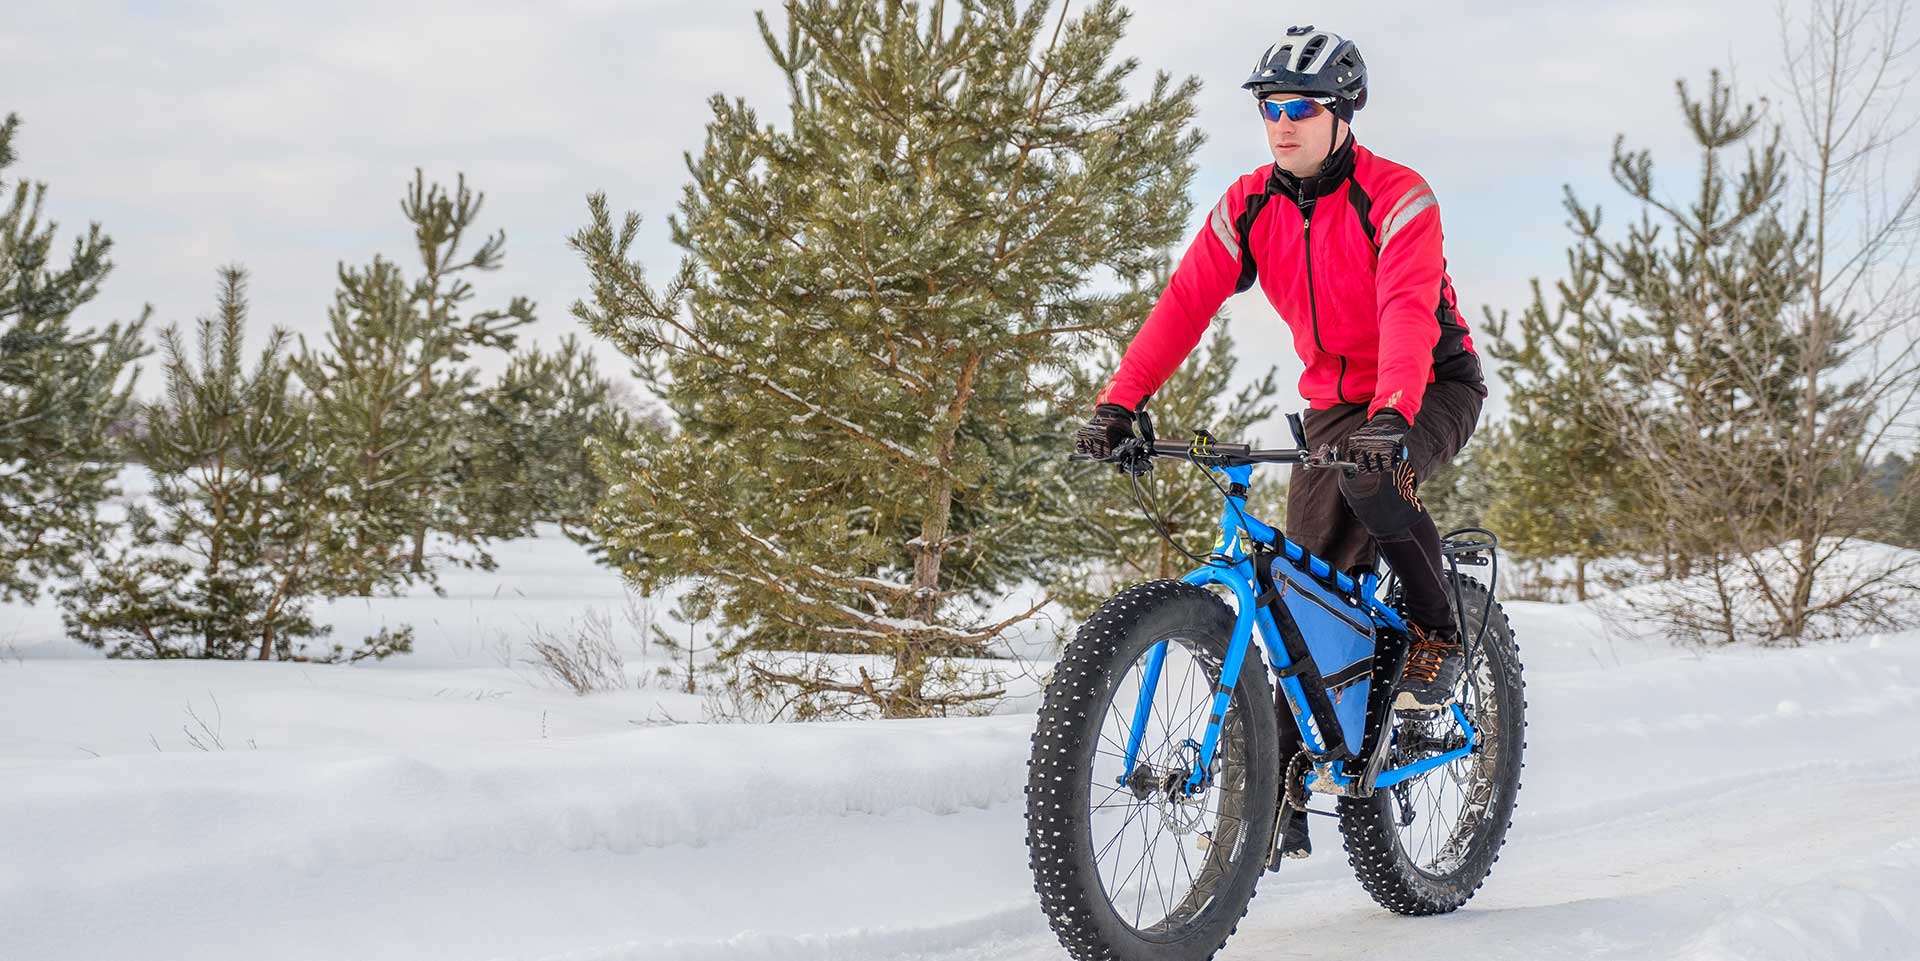 Tried-and-true tips for staying warm and safe while biking through winter